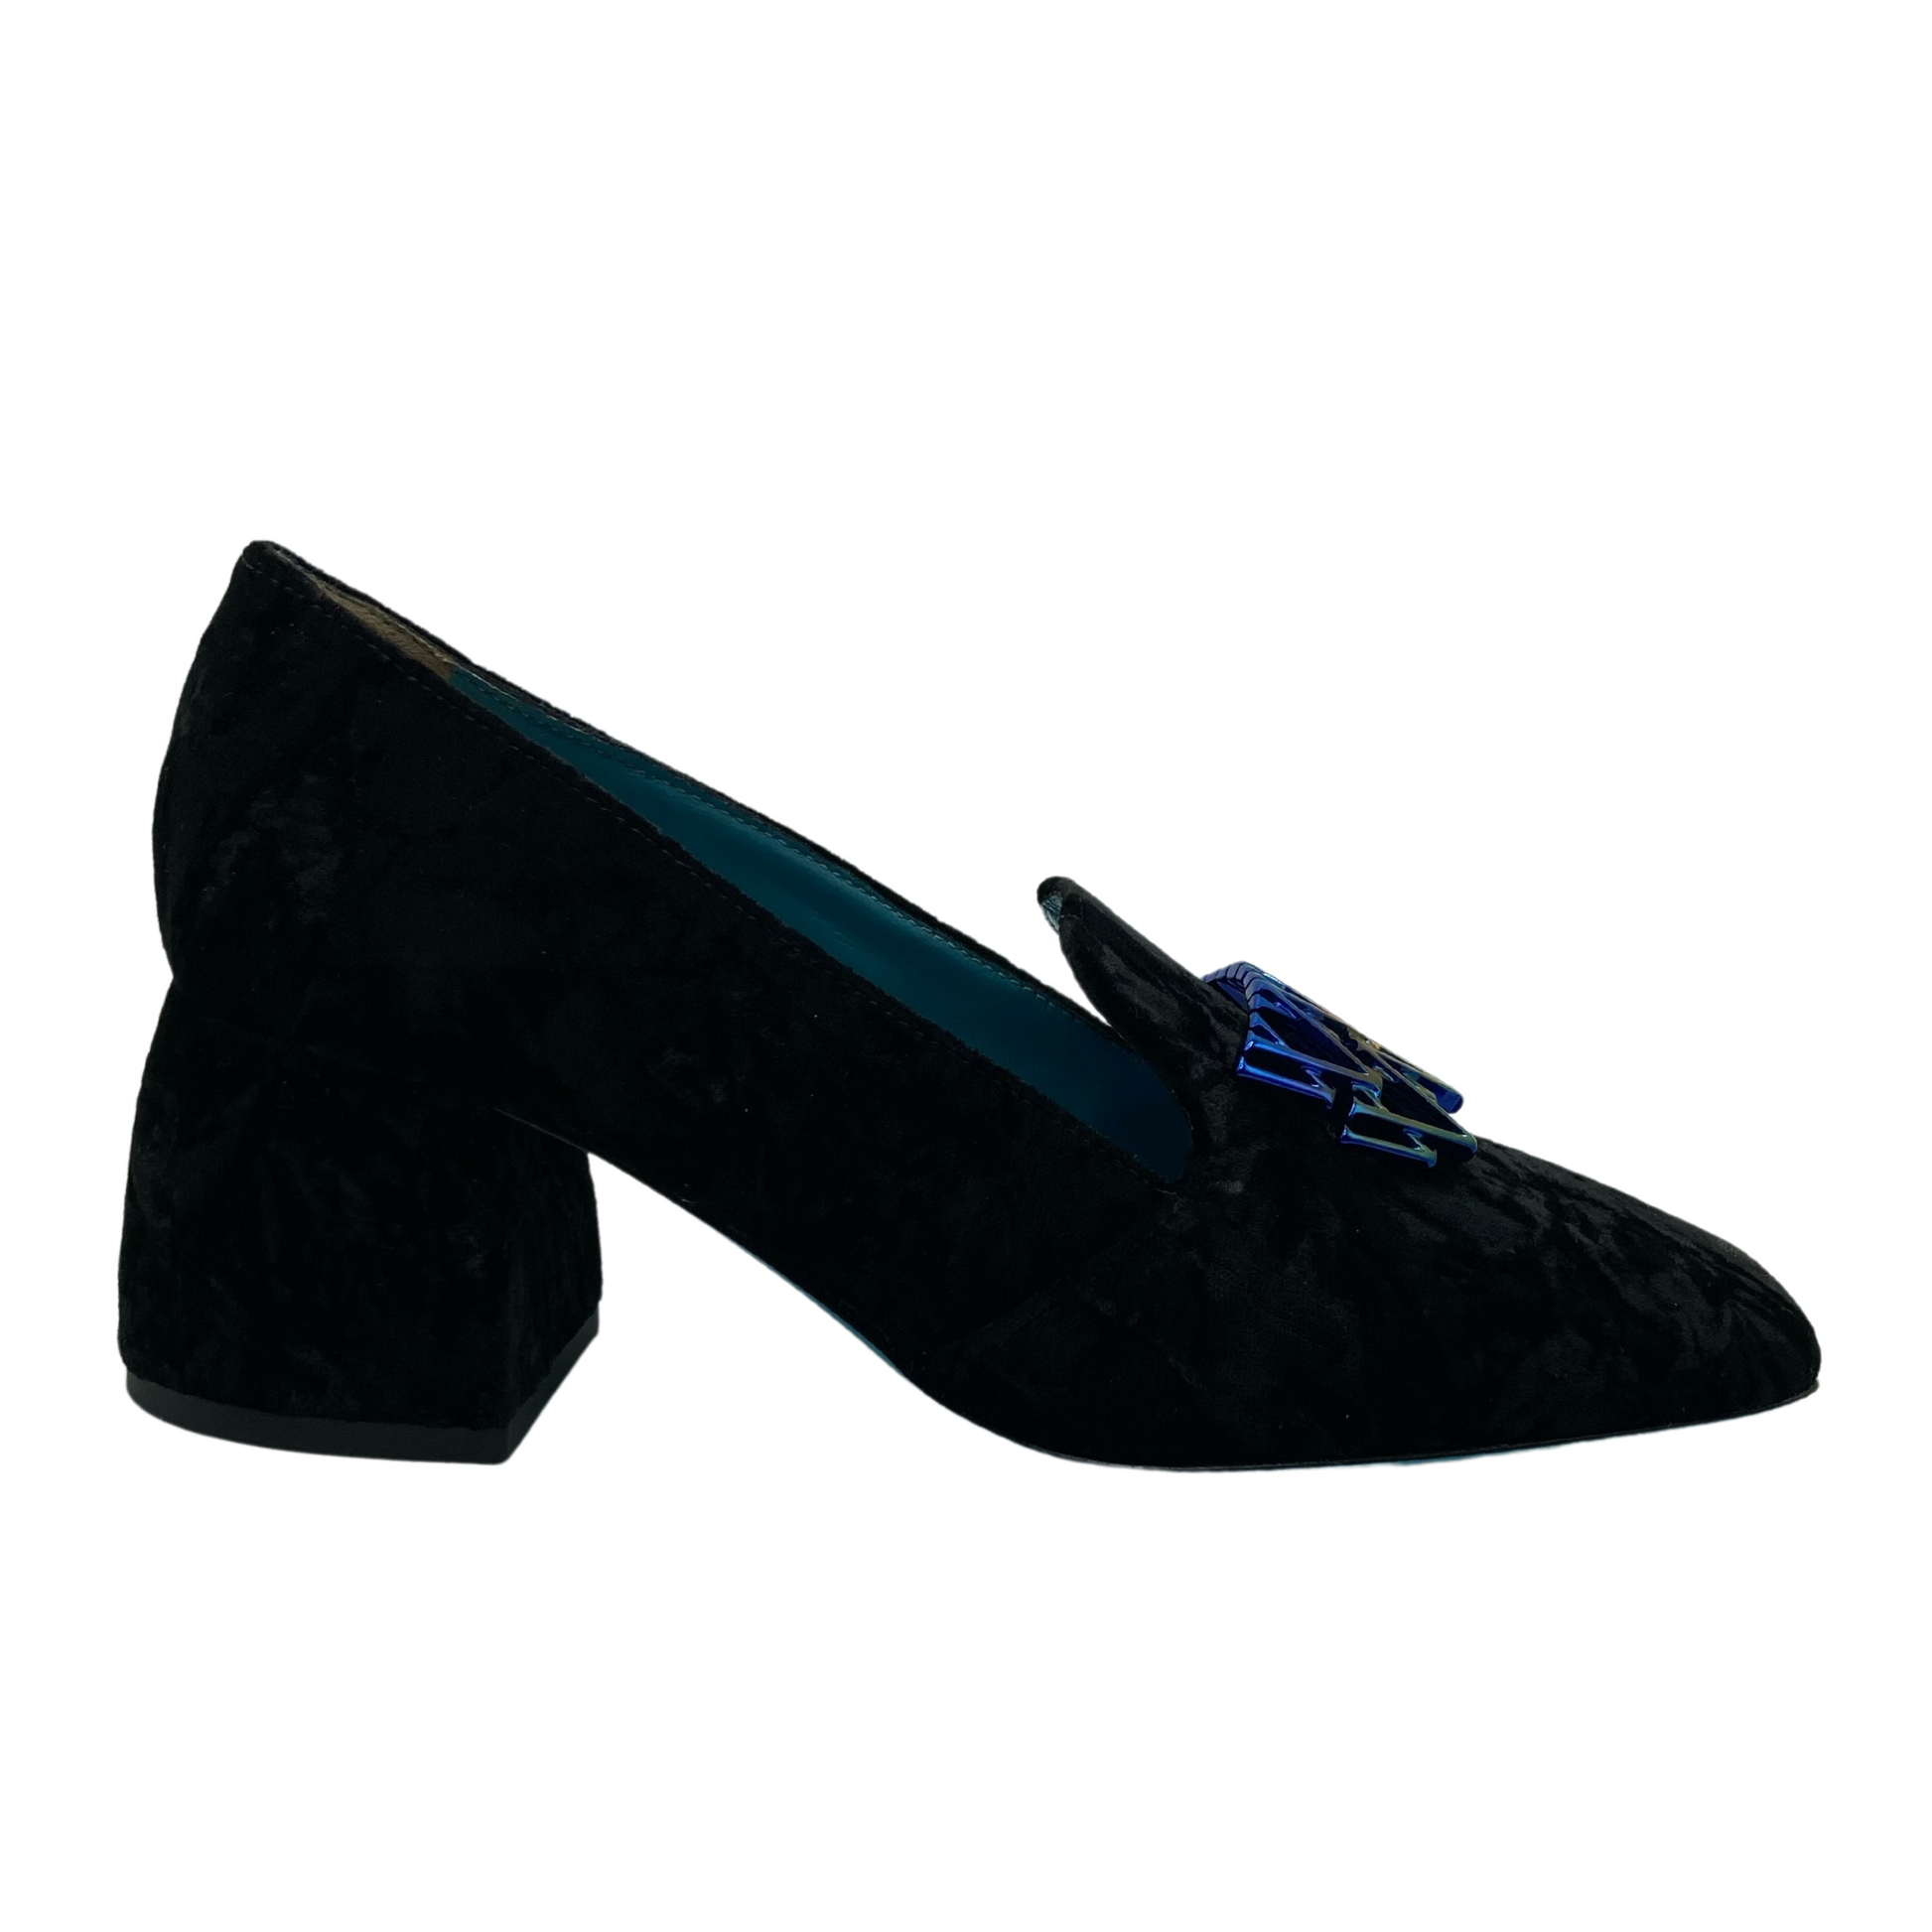 Right facing view of block heeled, black suede loafer with multicoloured detail on upper